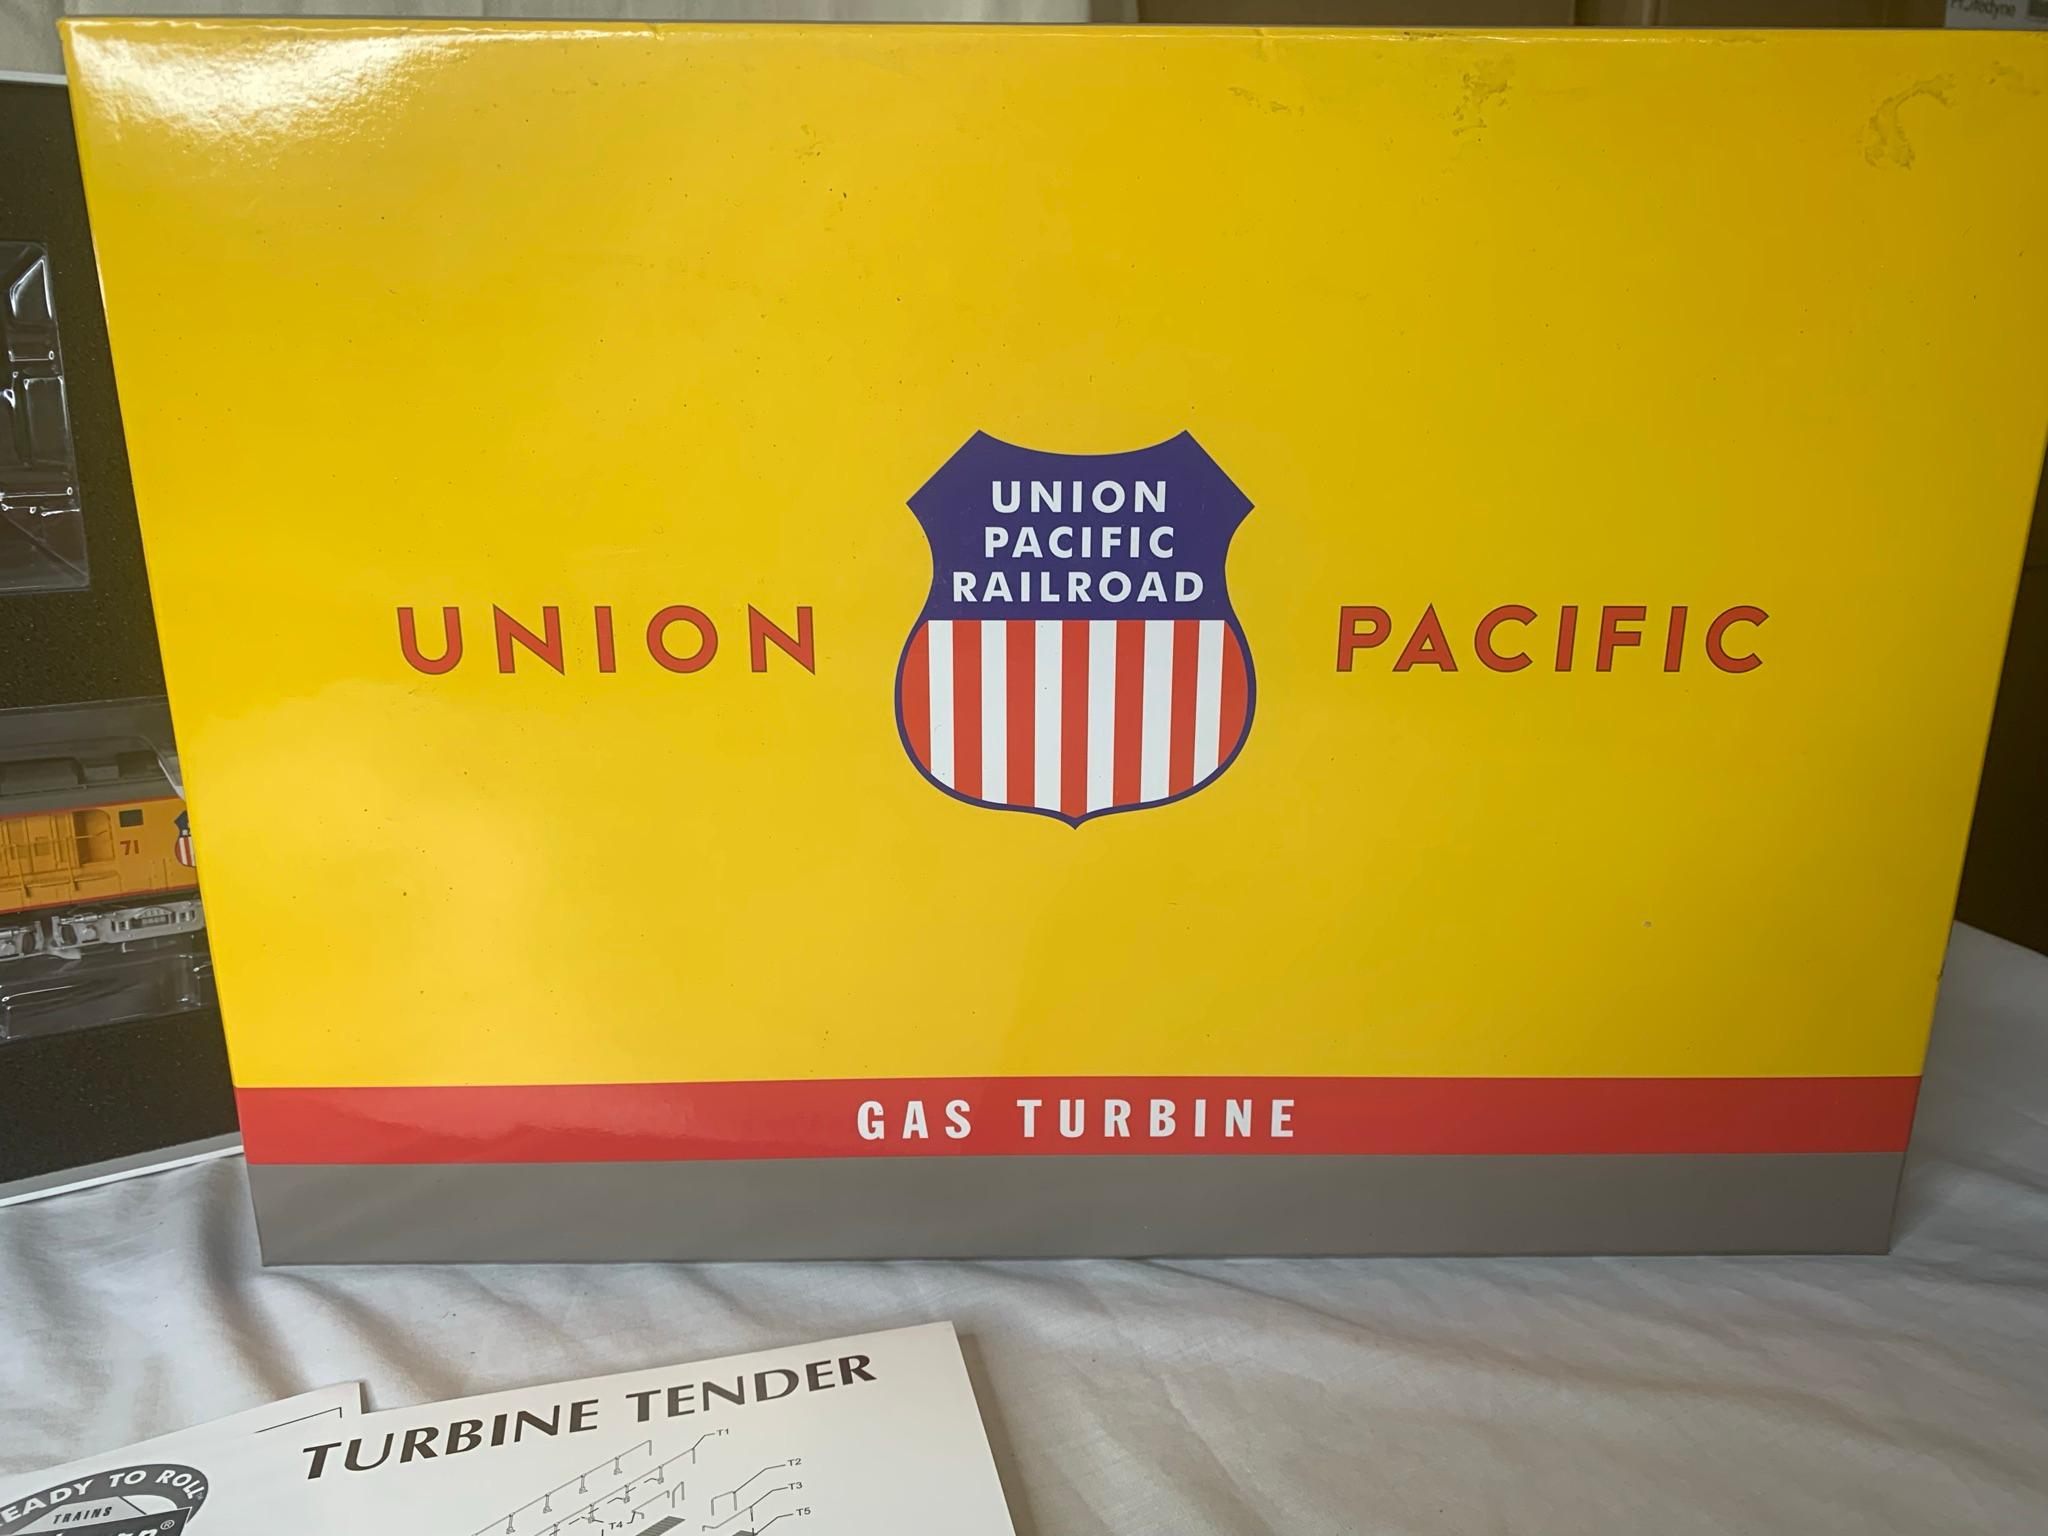 Horicon Hobby Inc Union Pacific by Athearn